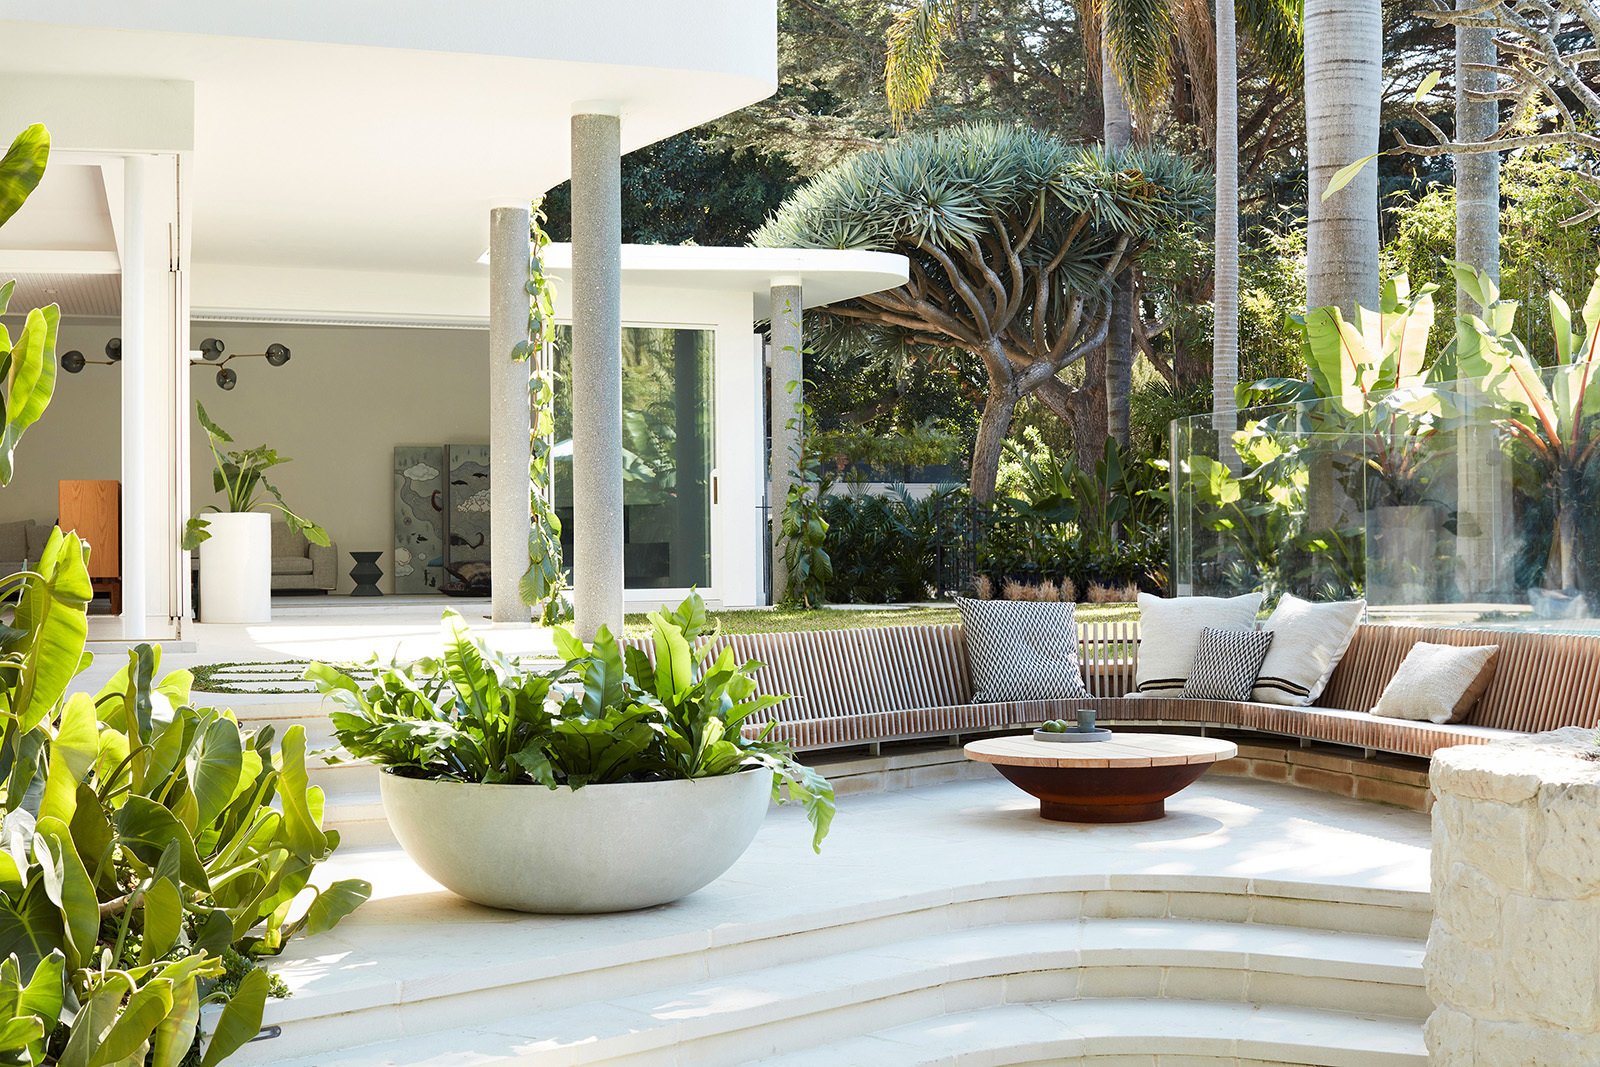 This midcentury home was originally designed by George Reeves and updated by Luigi Rosselli Architects. In the backyard, Will Dangar's landscape design places the verdant, tropical scenery at center stage.